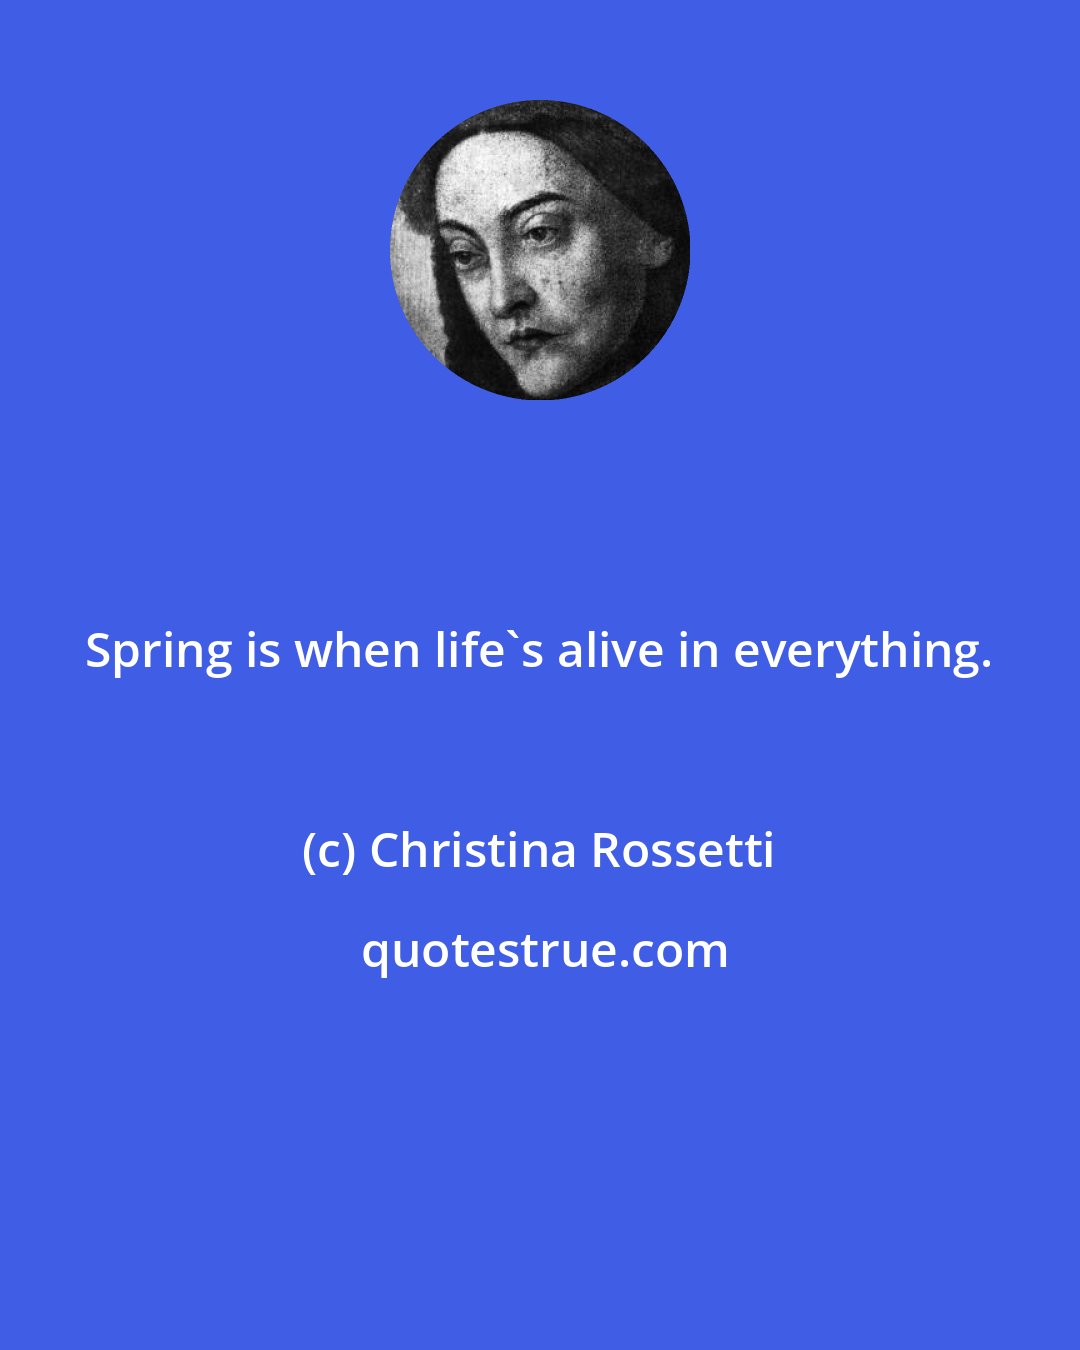 Christina Rossetti: Spring is when life's alive in everything.